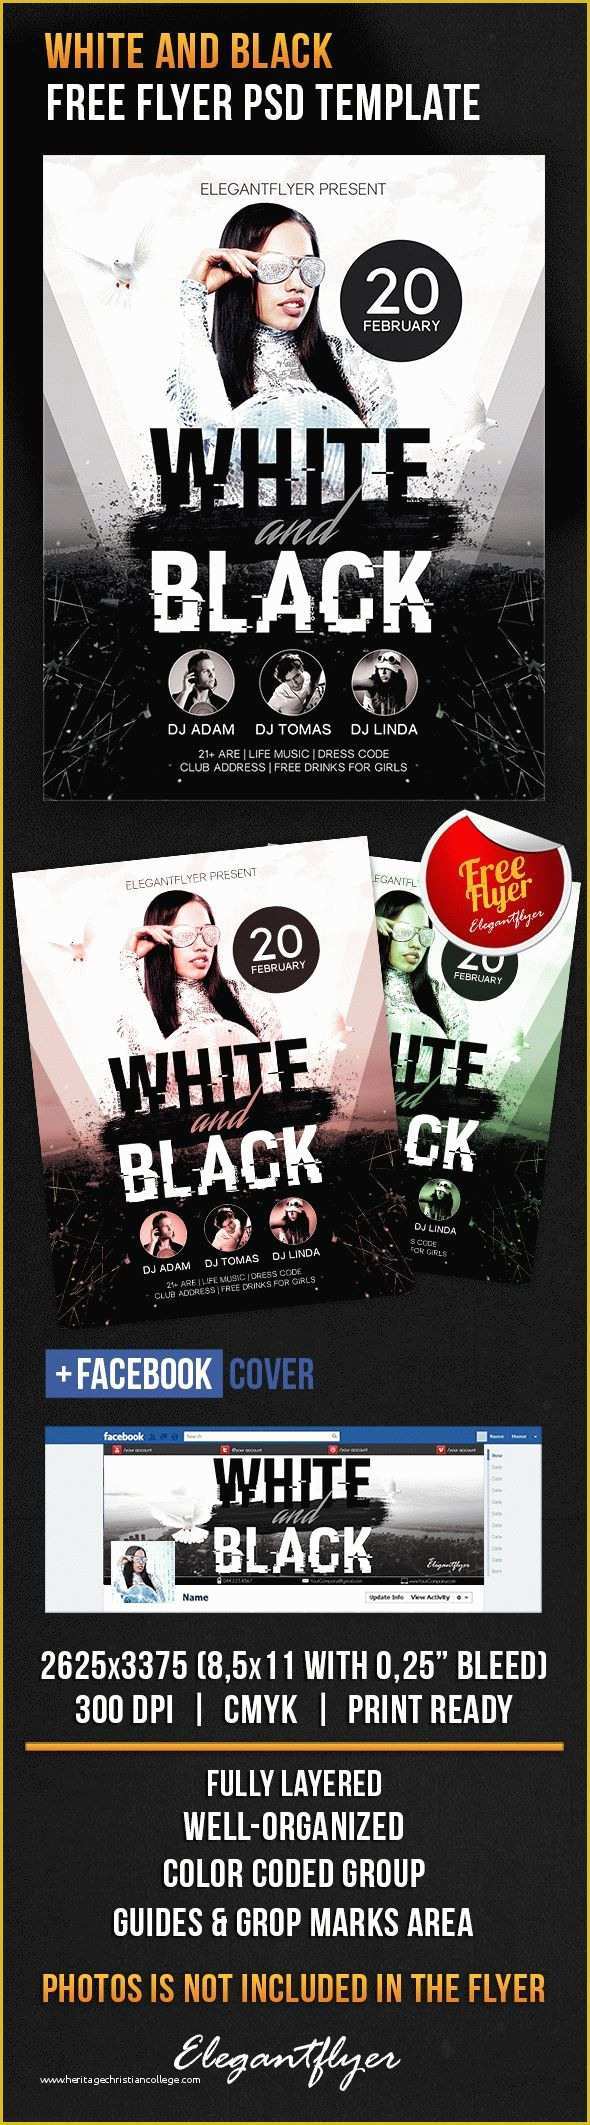 Black and White Flyer Template Free Of White and Black – Free Flyer Psd Template – by Elegantflyer